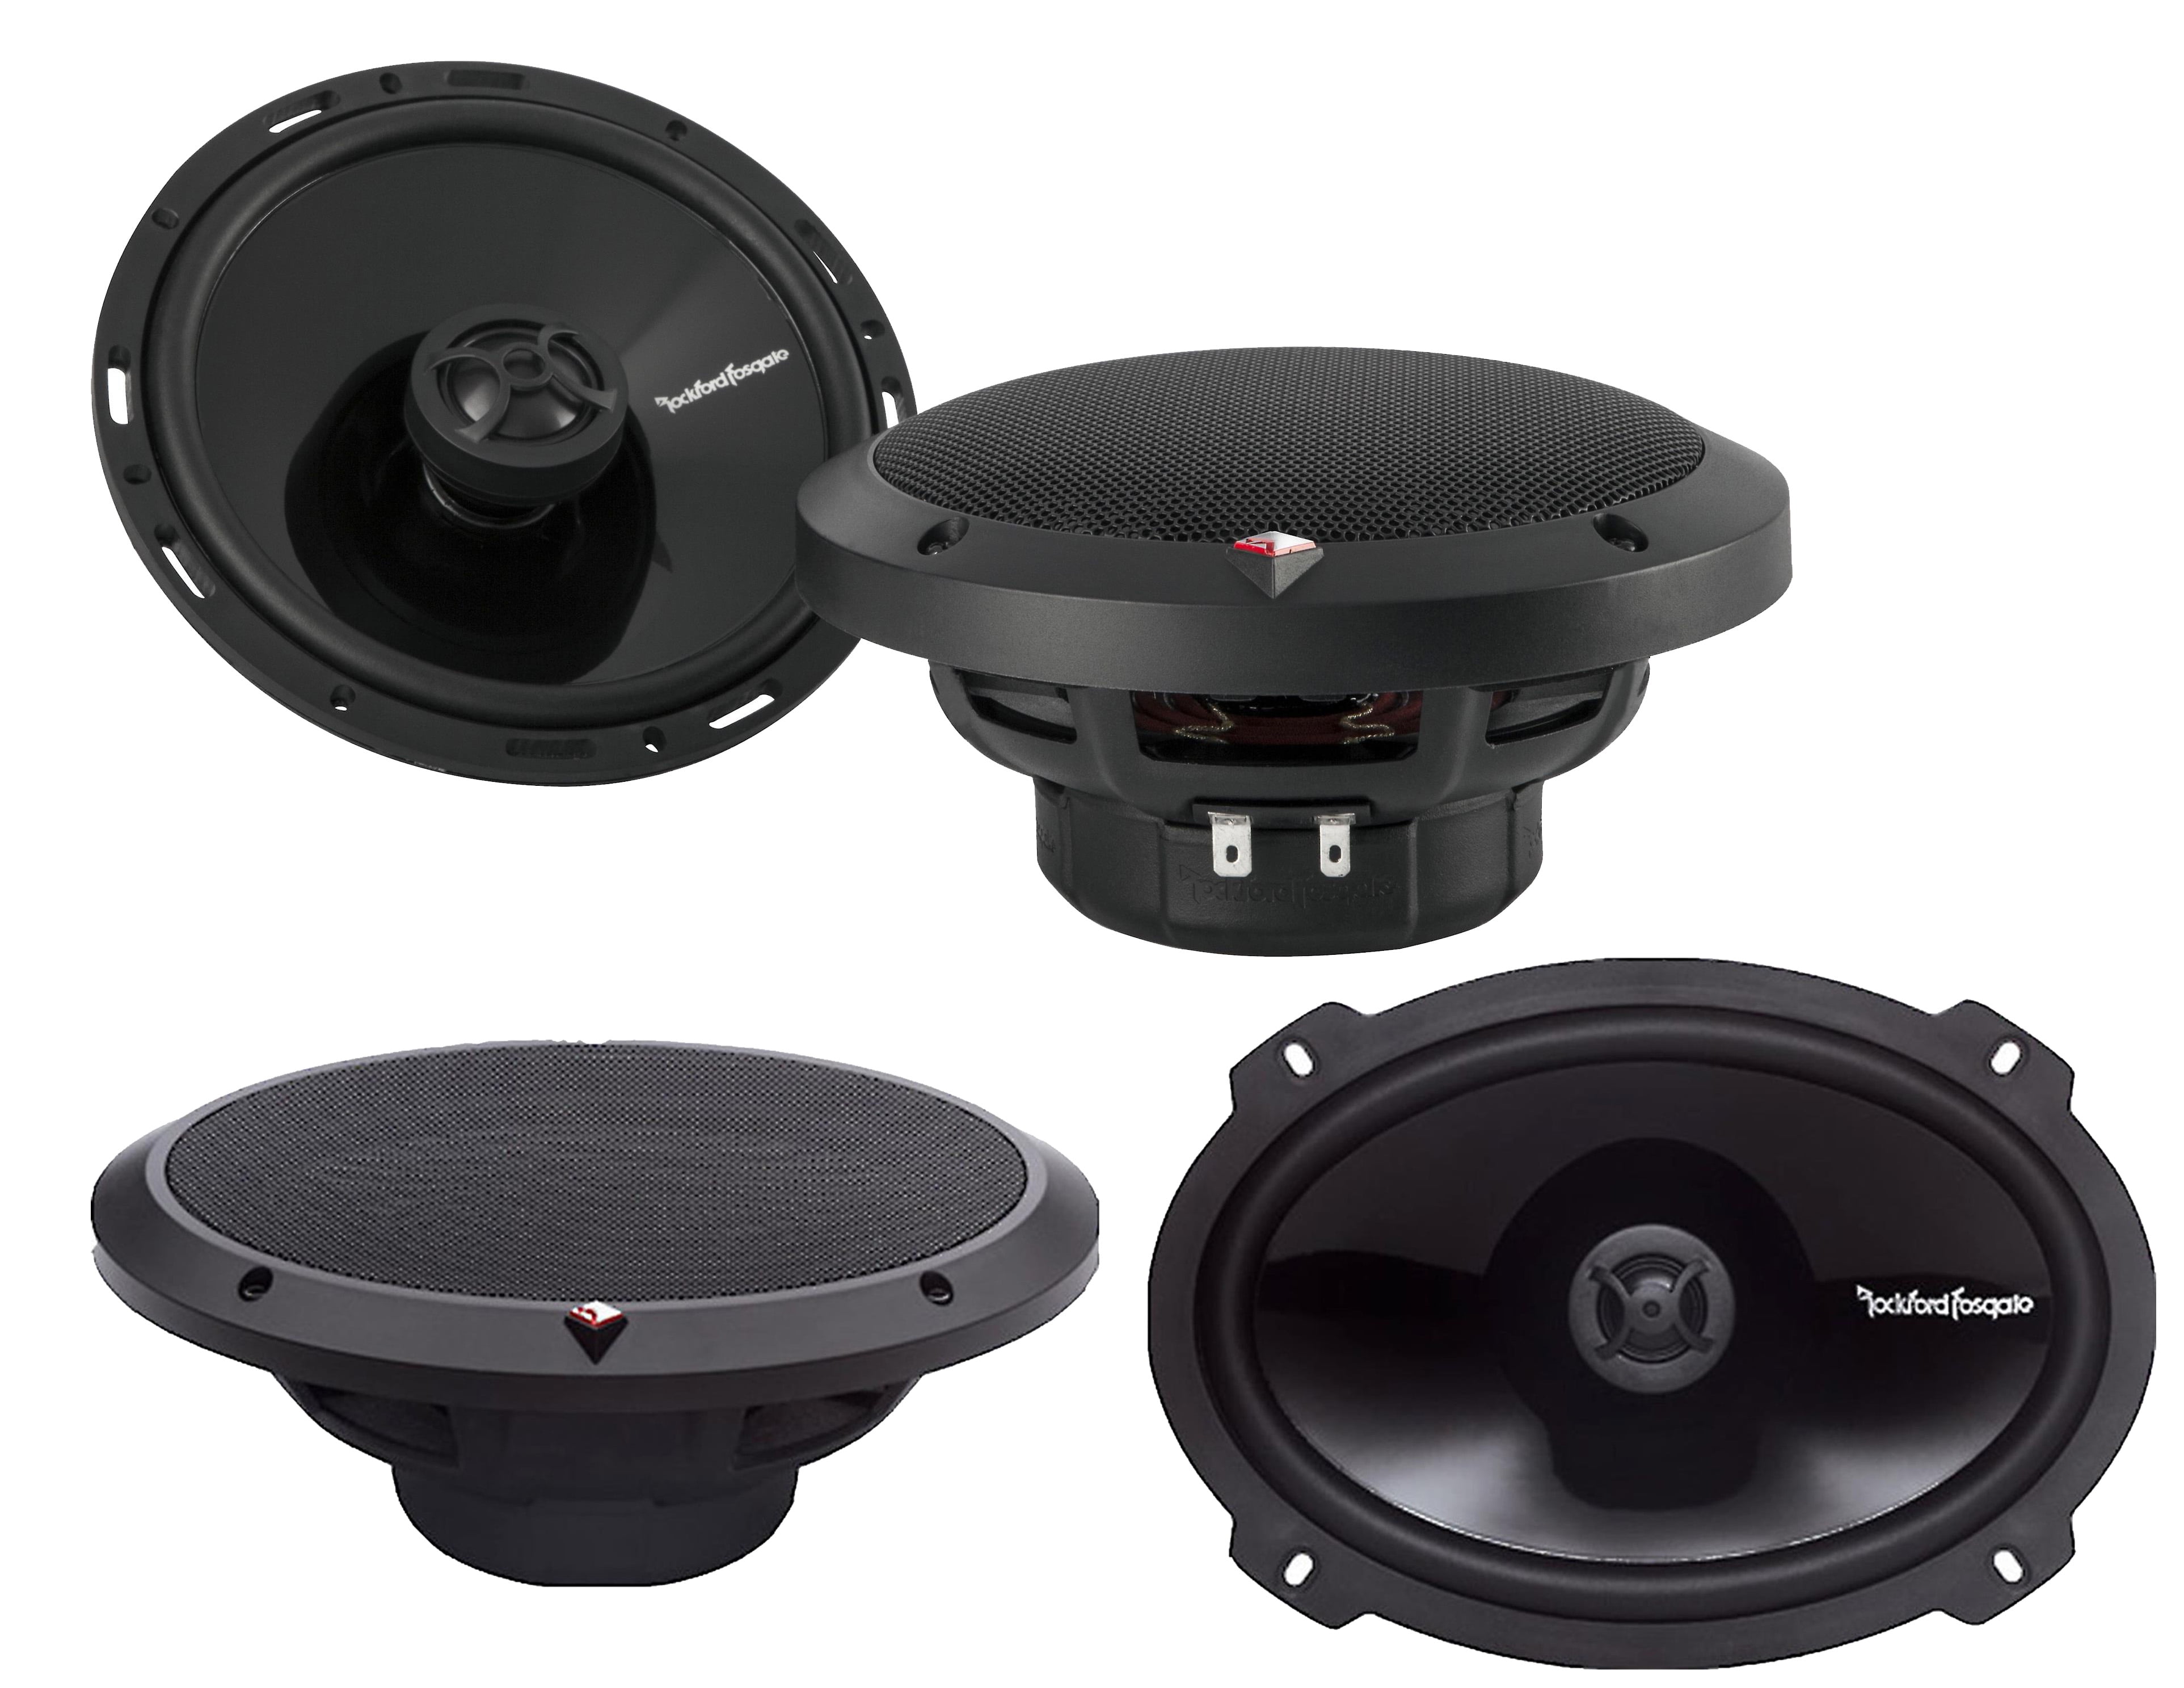 New Rockford Fosgate P1675 6.75" 120W 3 Way Car Coaxial Audio Speakers Stereo 2 